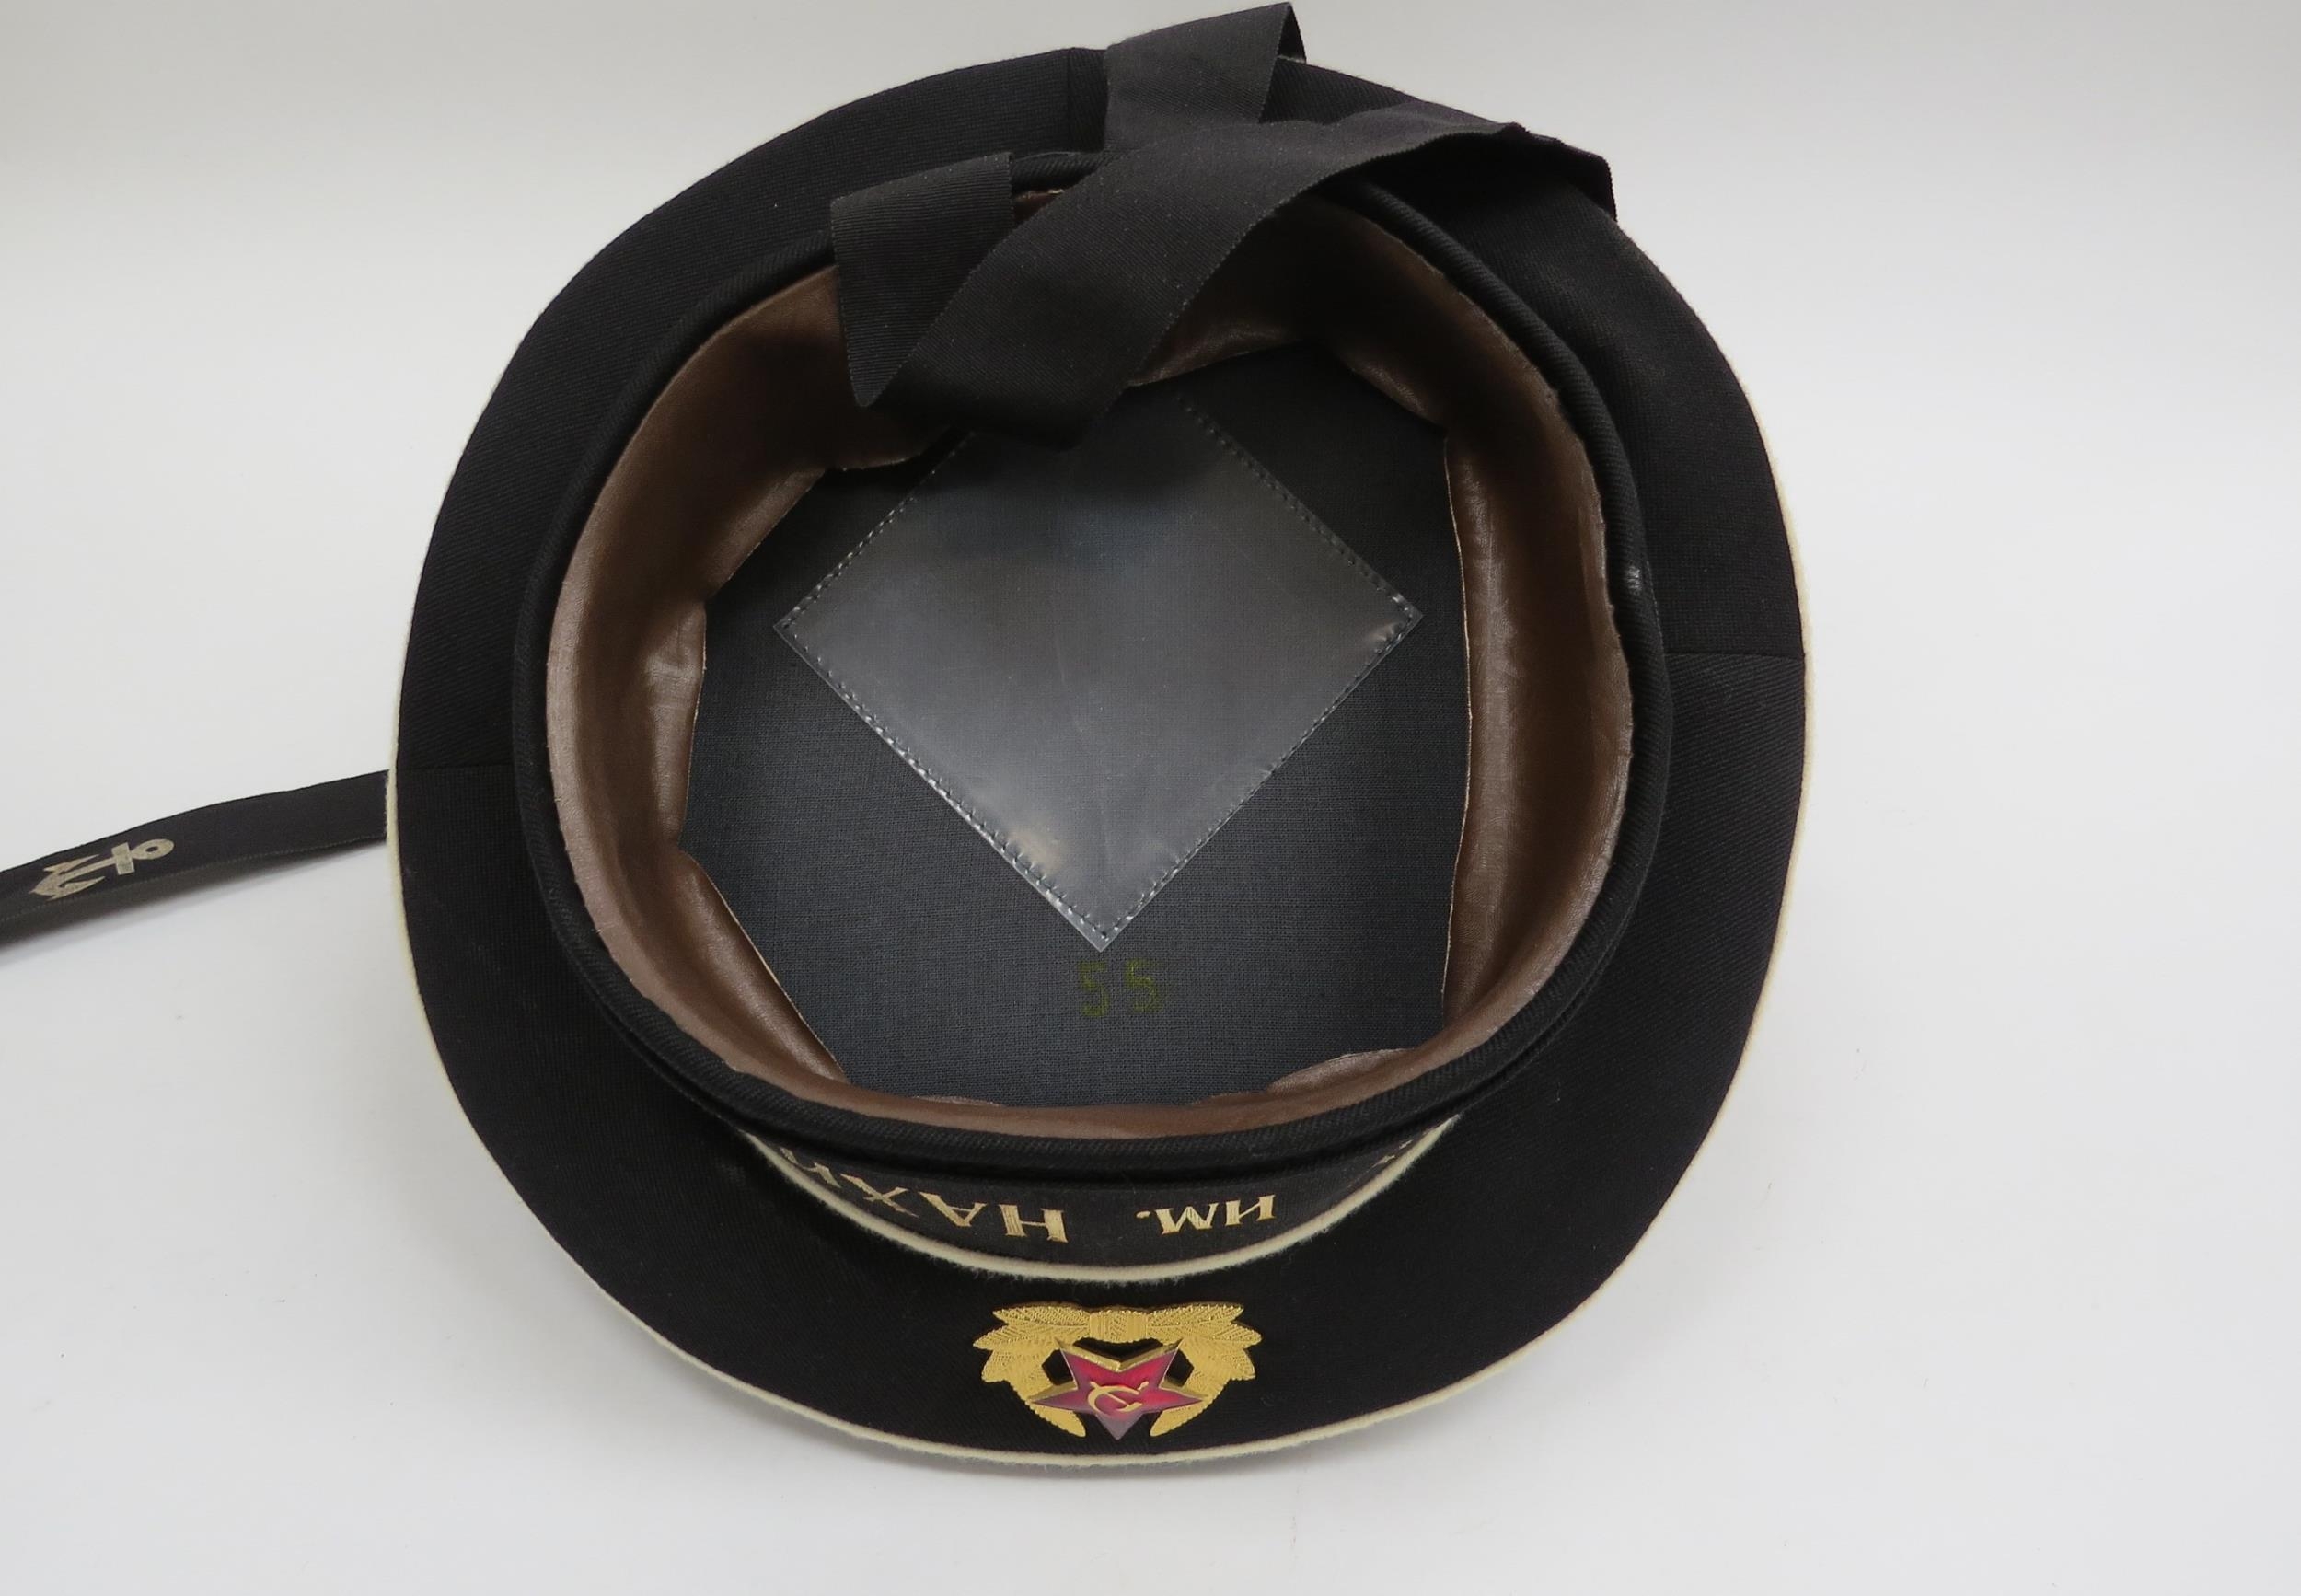 Three USSR Russian Soviet Navy sailor's caps, black with white piping, each with hammer and sickle - Image 2 of 4